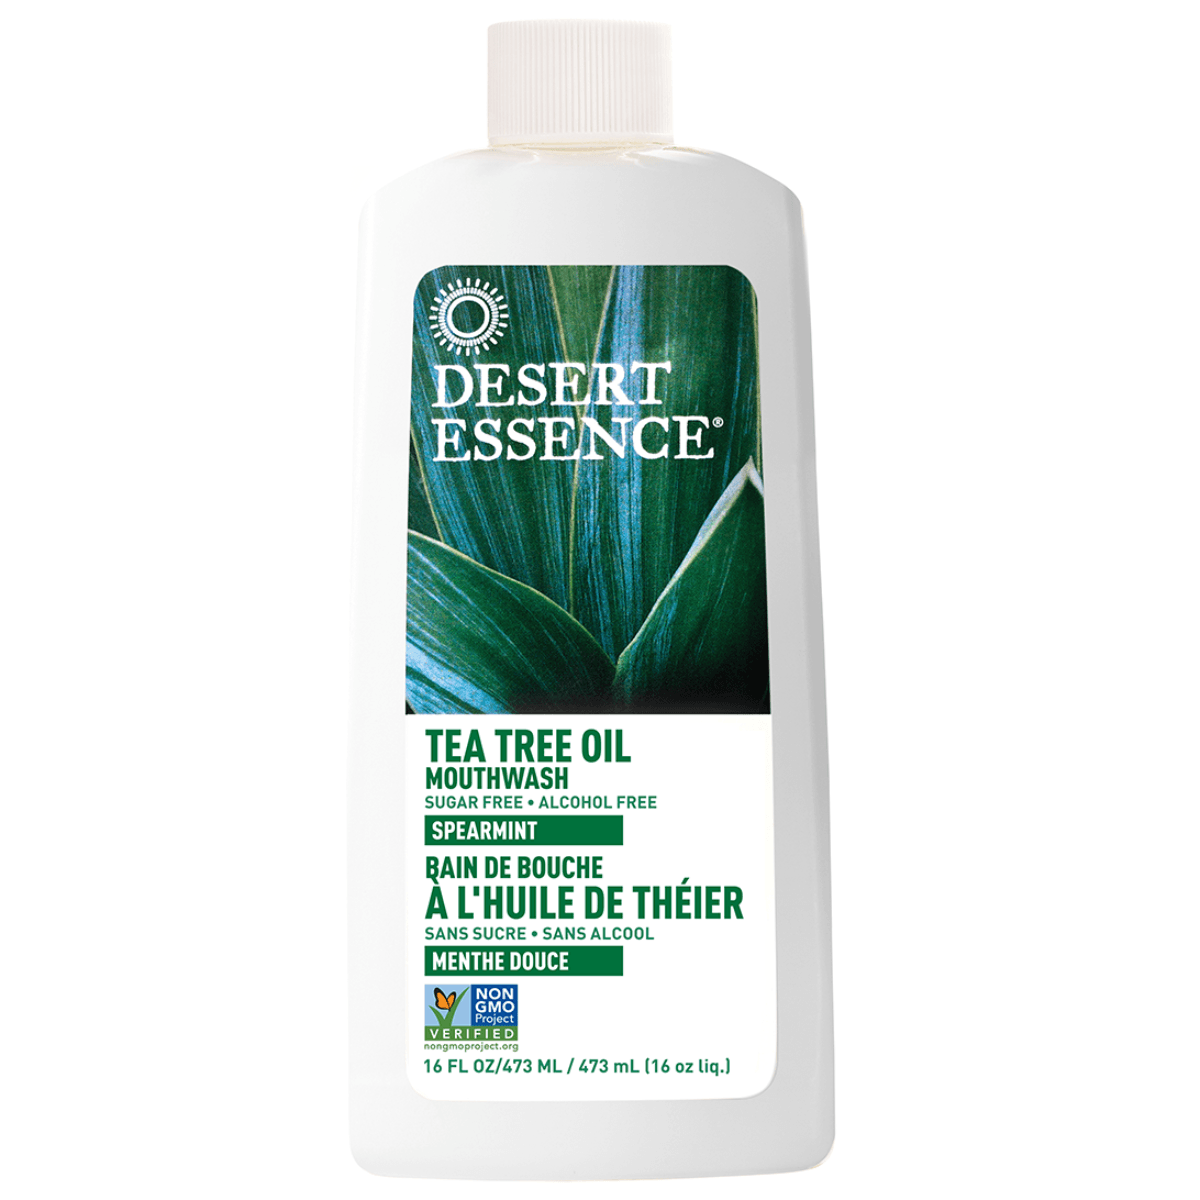 Desert Essence Mouthwash Tea Tree Oil With Spearmint 473mL Oral Care at Village Vitamin Store